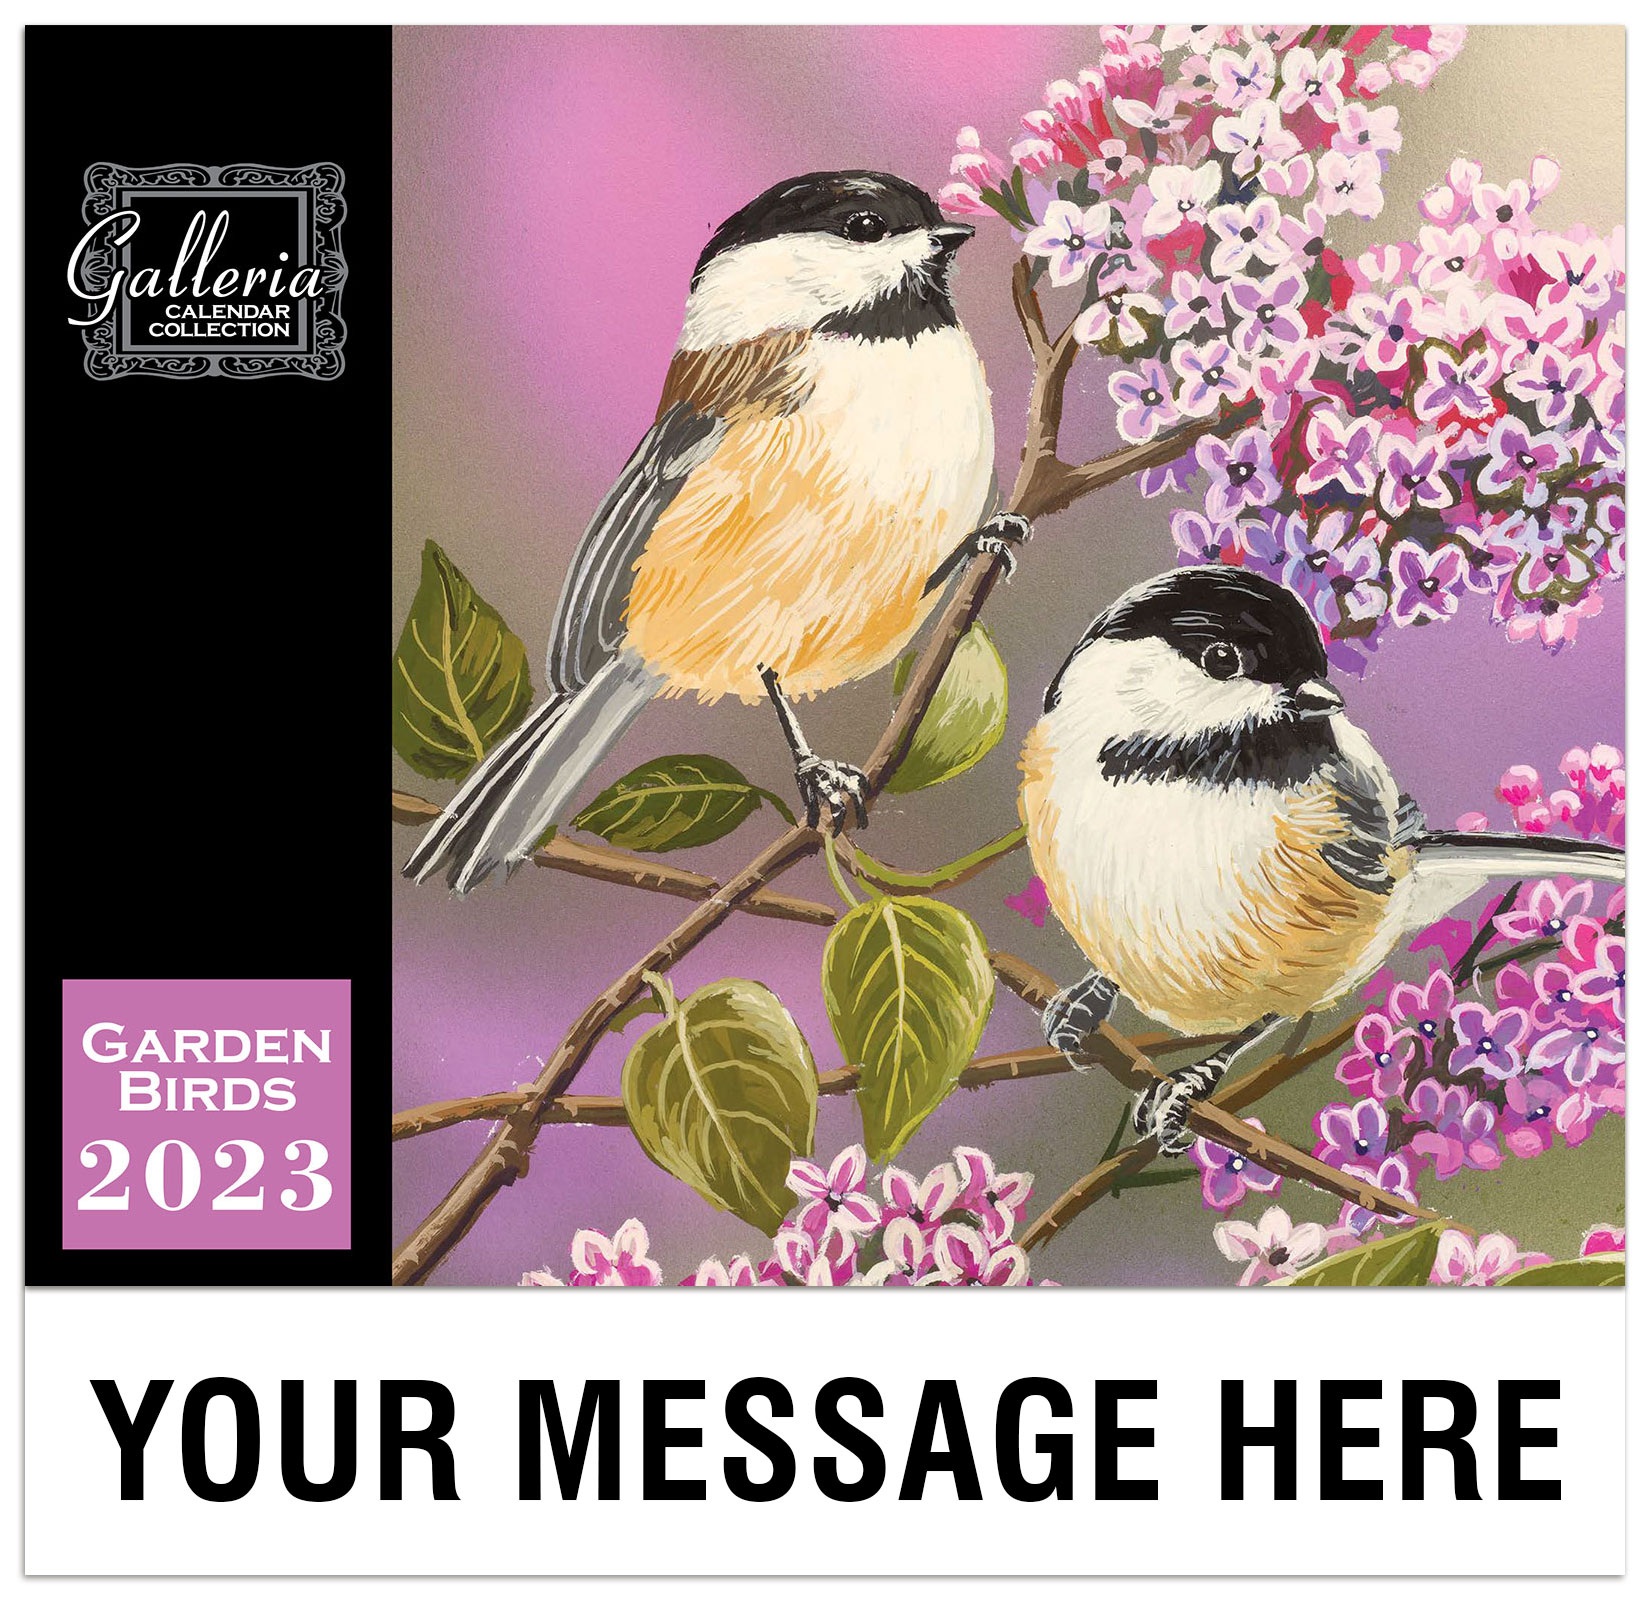 GalleriaCalendars Promo Calendars Are The Most Effective Promotional